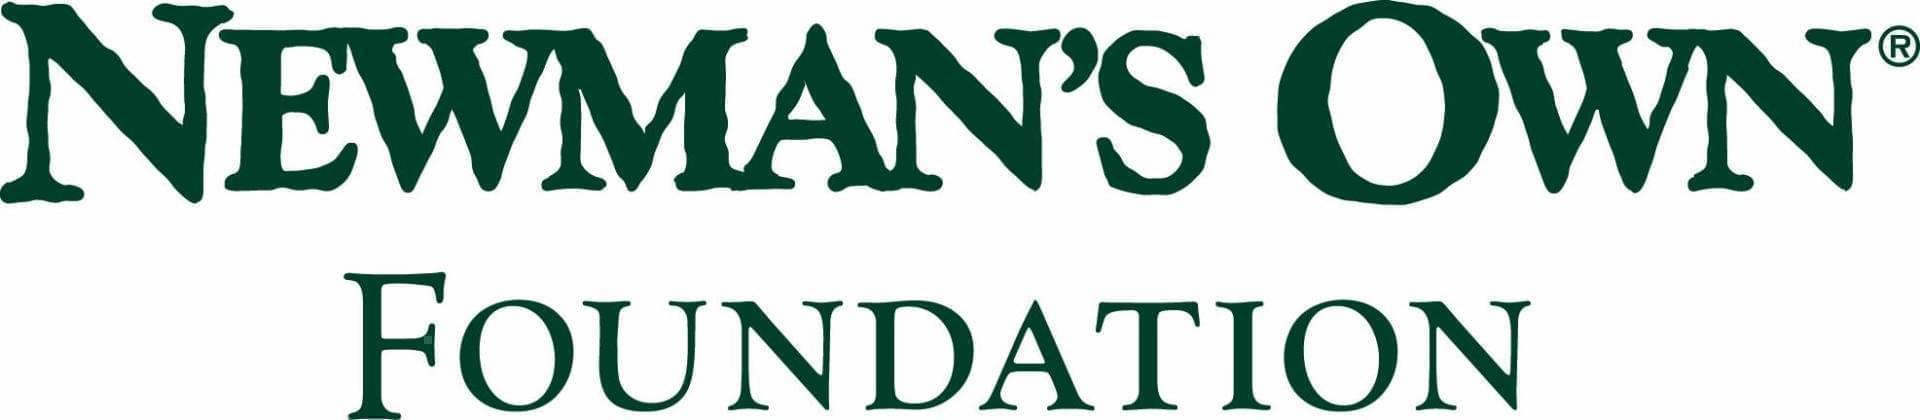 Newman's Own Foundation logo